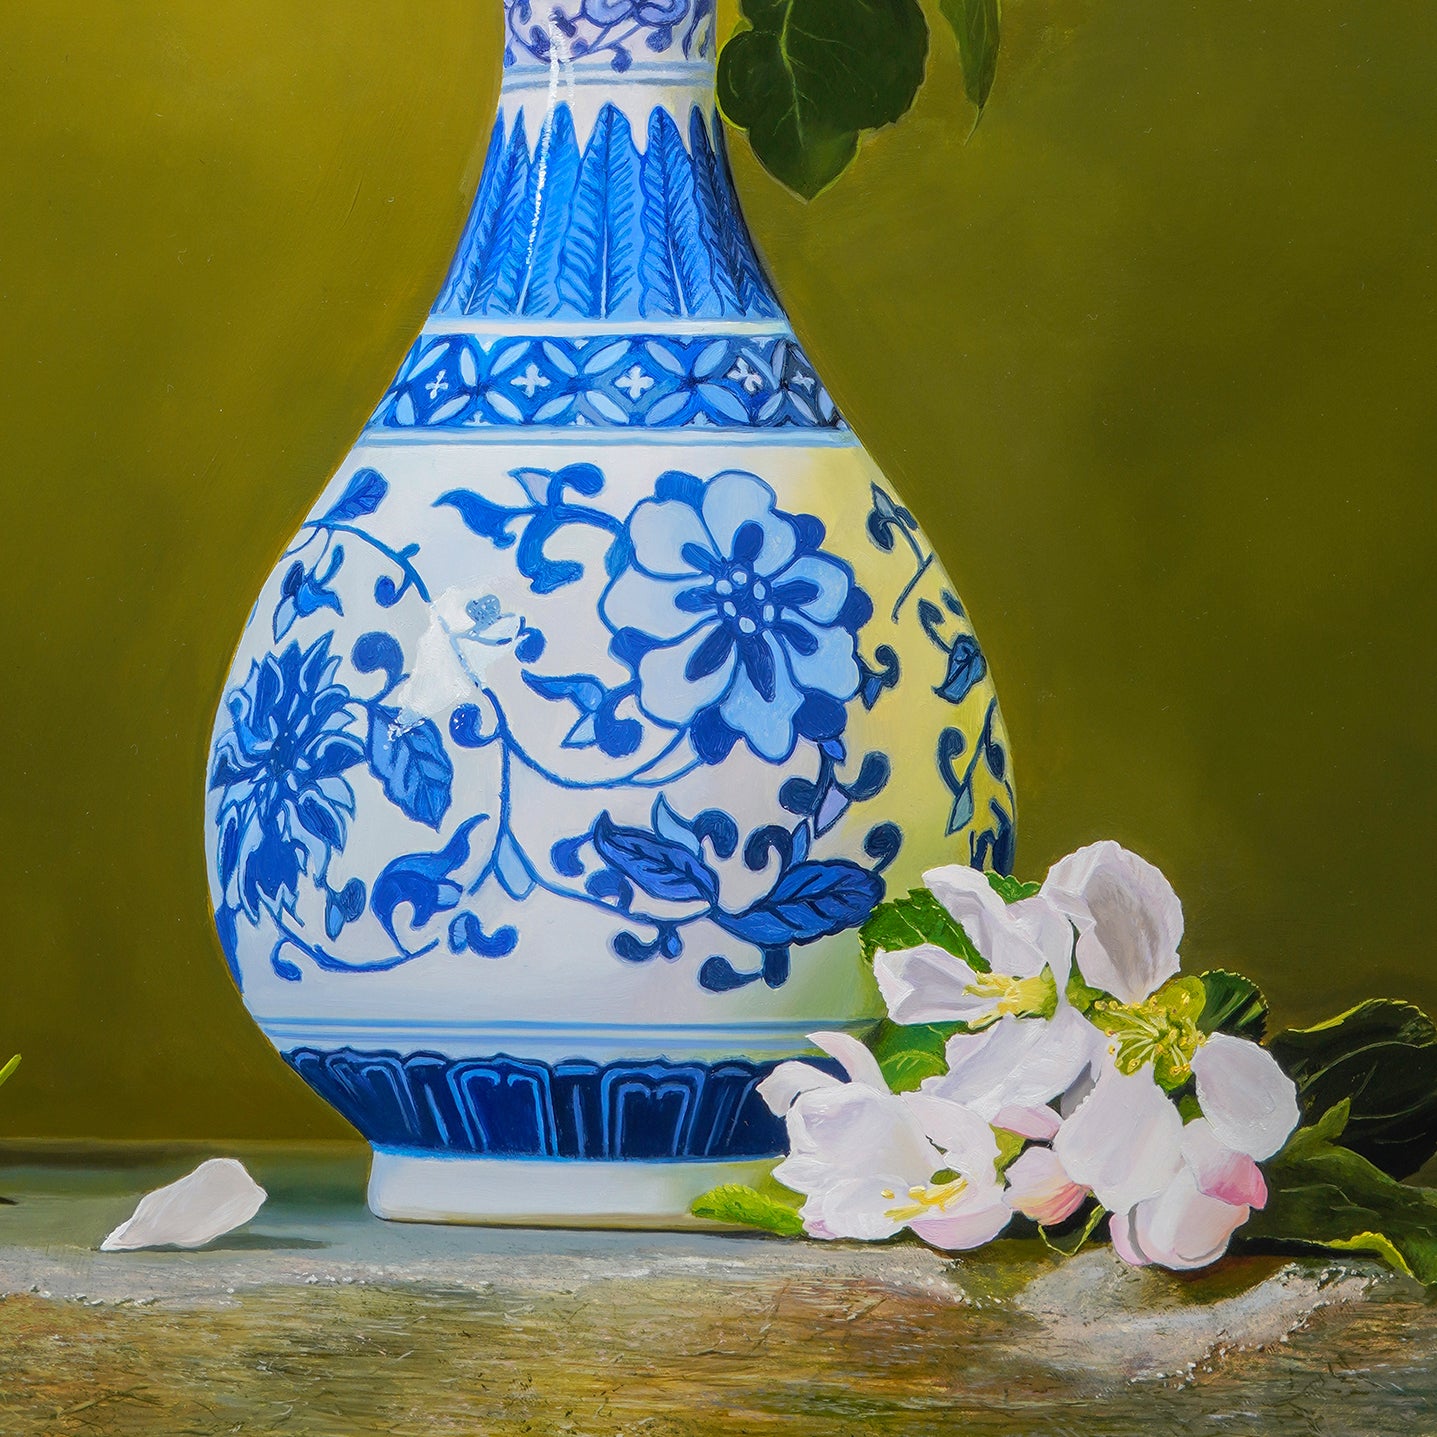 "Vase with Apple Blossom"  Original Oil Painting